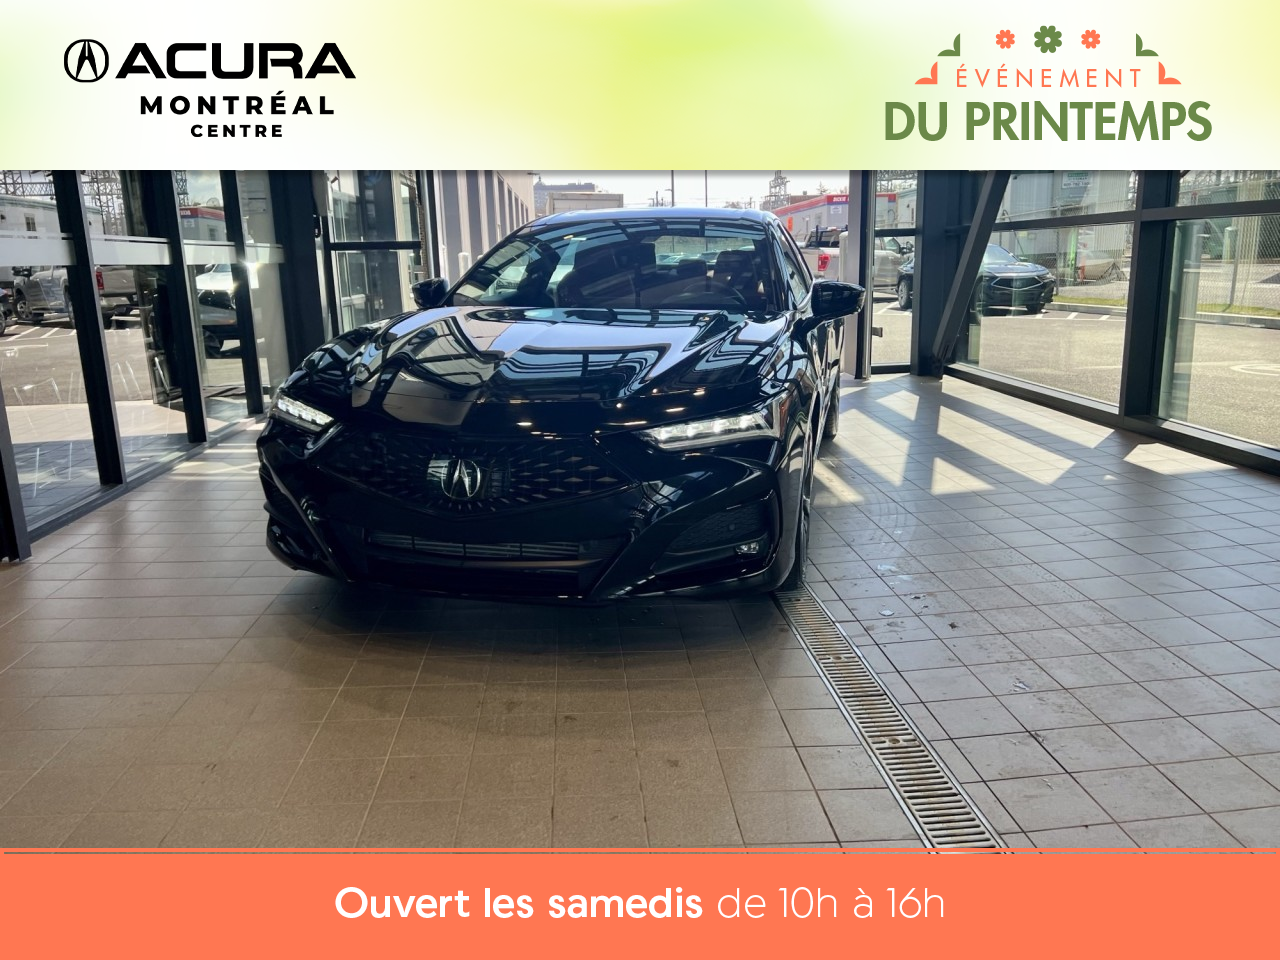 2021 Acura TLX A-SPEC SH-AWD-Certifie Acura - Comme Neuf